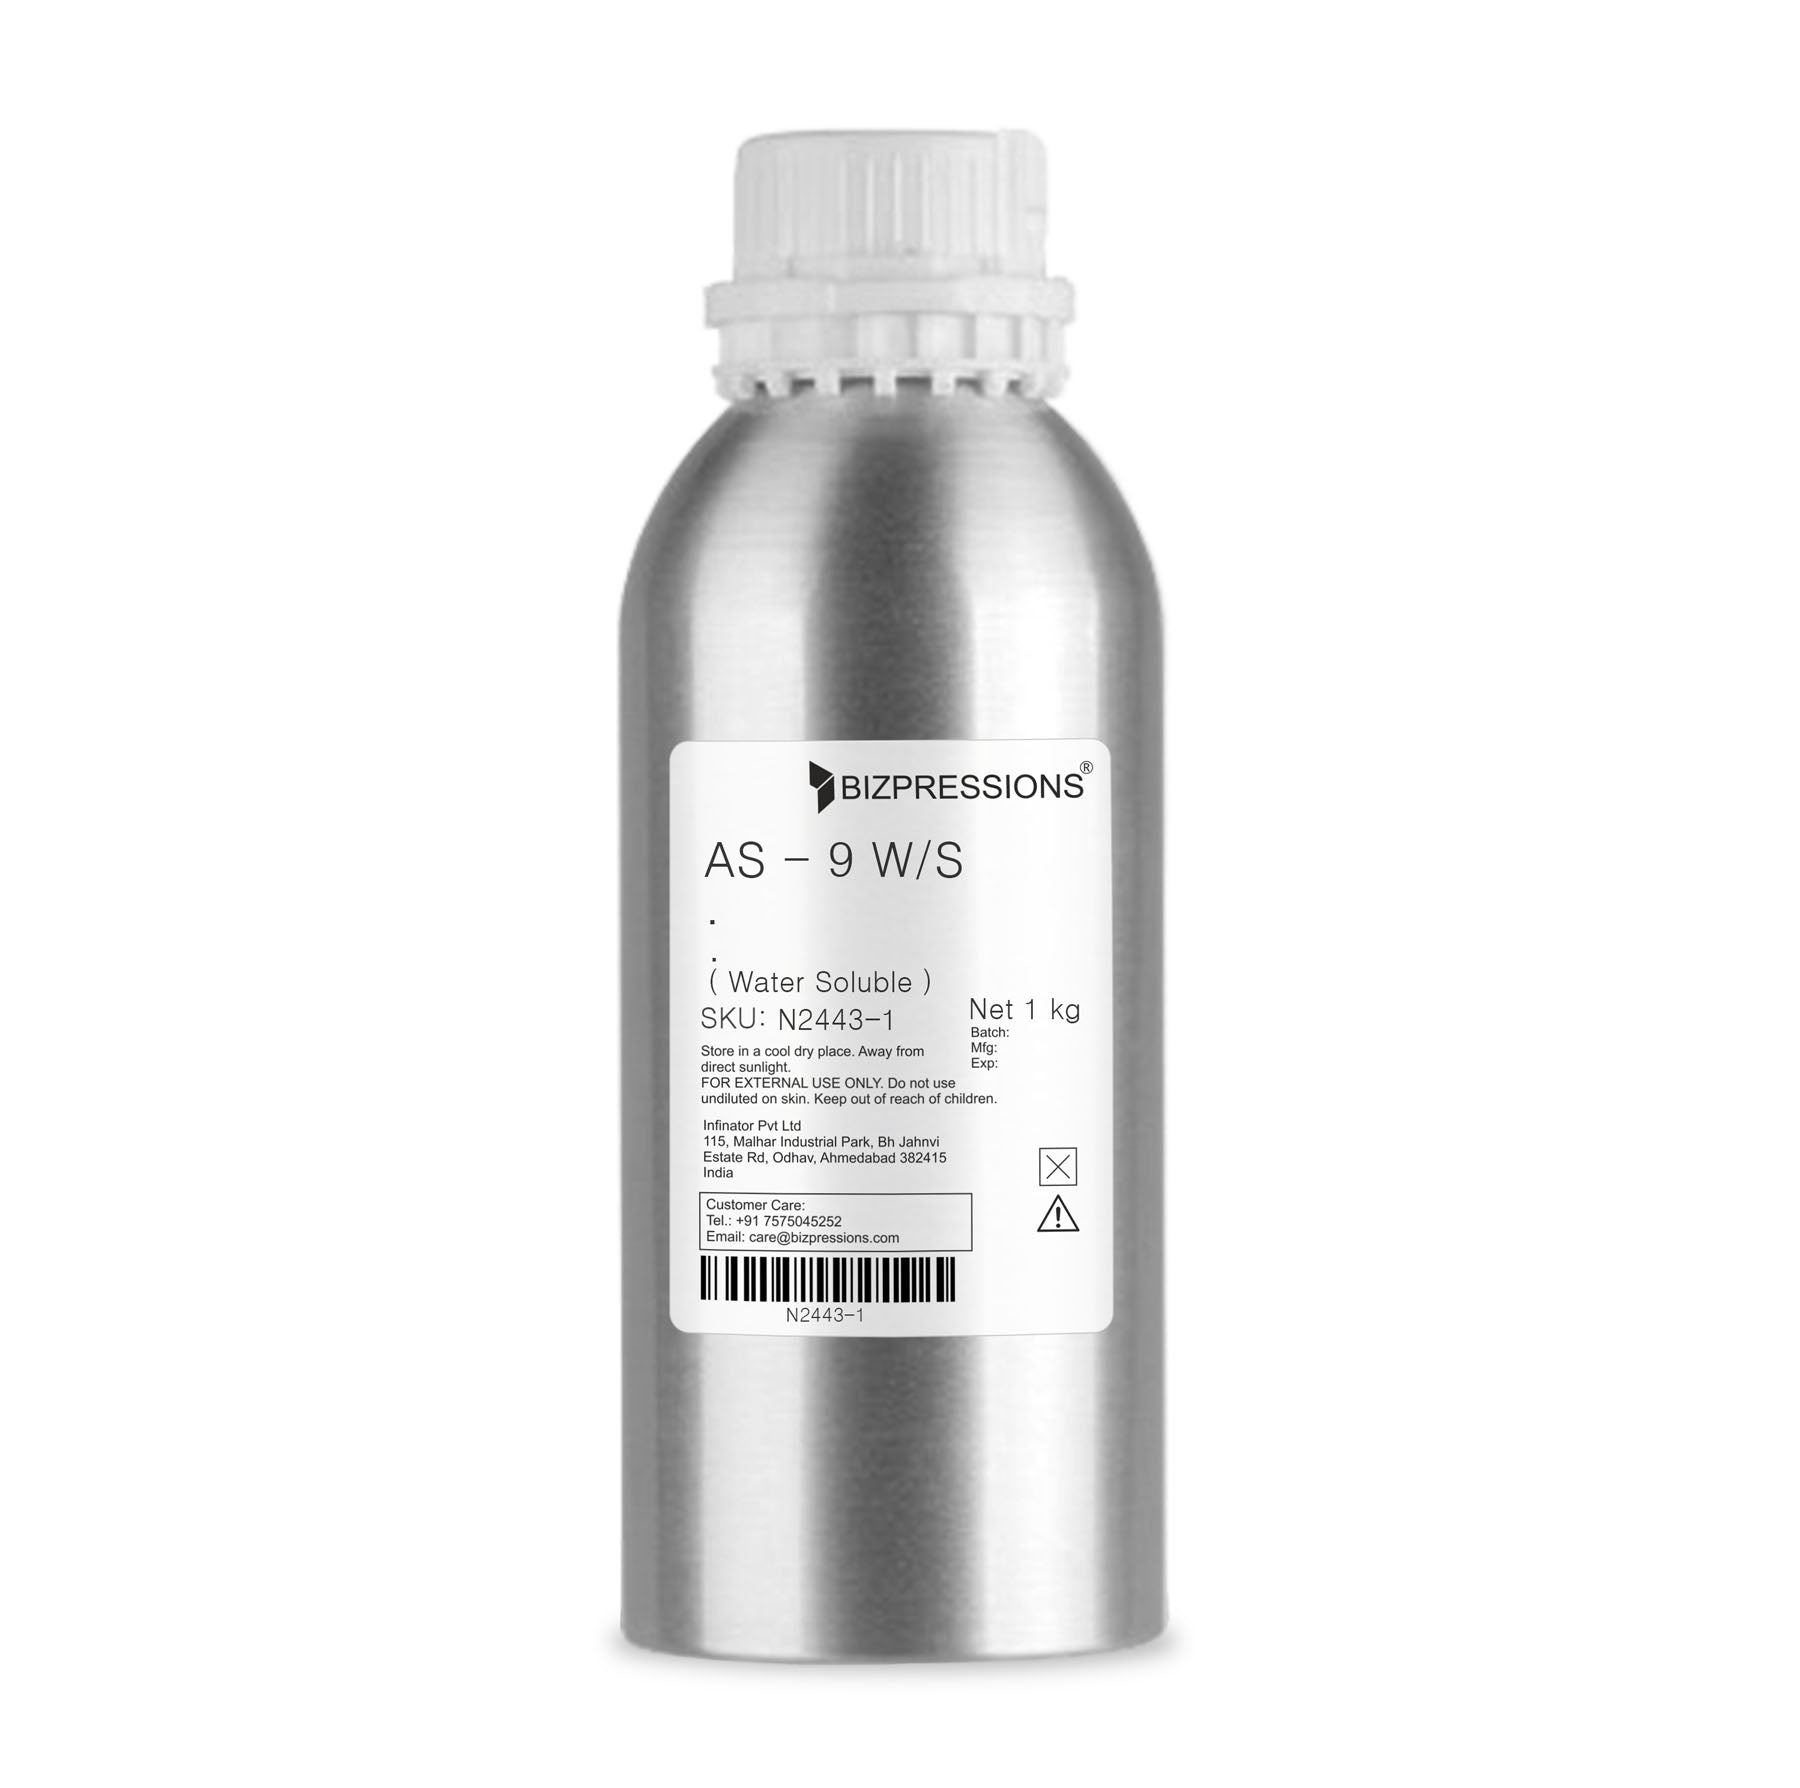 AS - 9 W/S - Fragrance ( Water Soluble ) - 1 kg